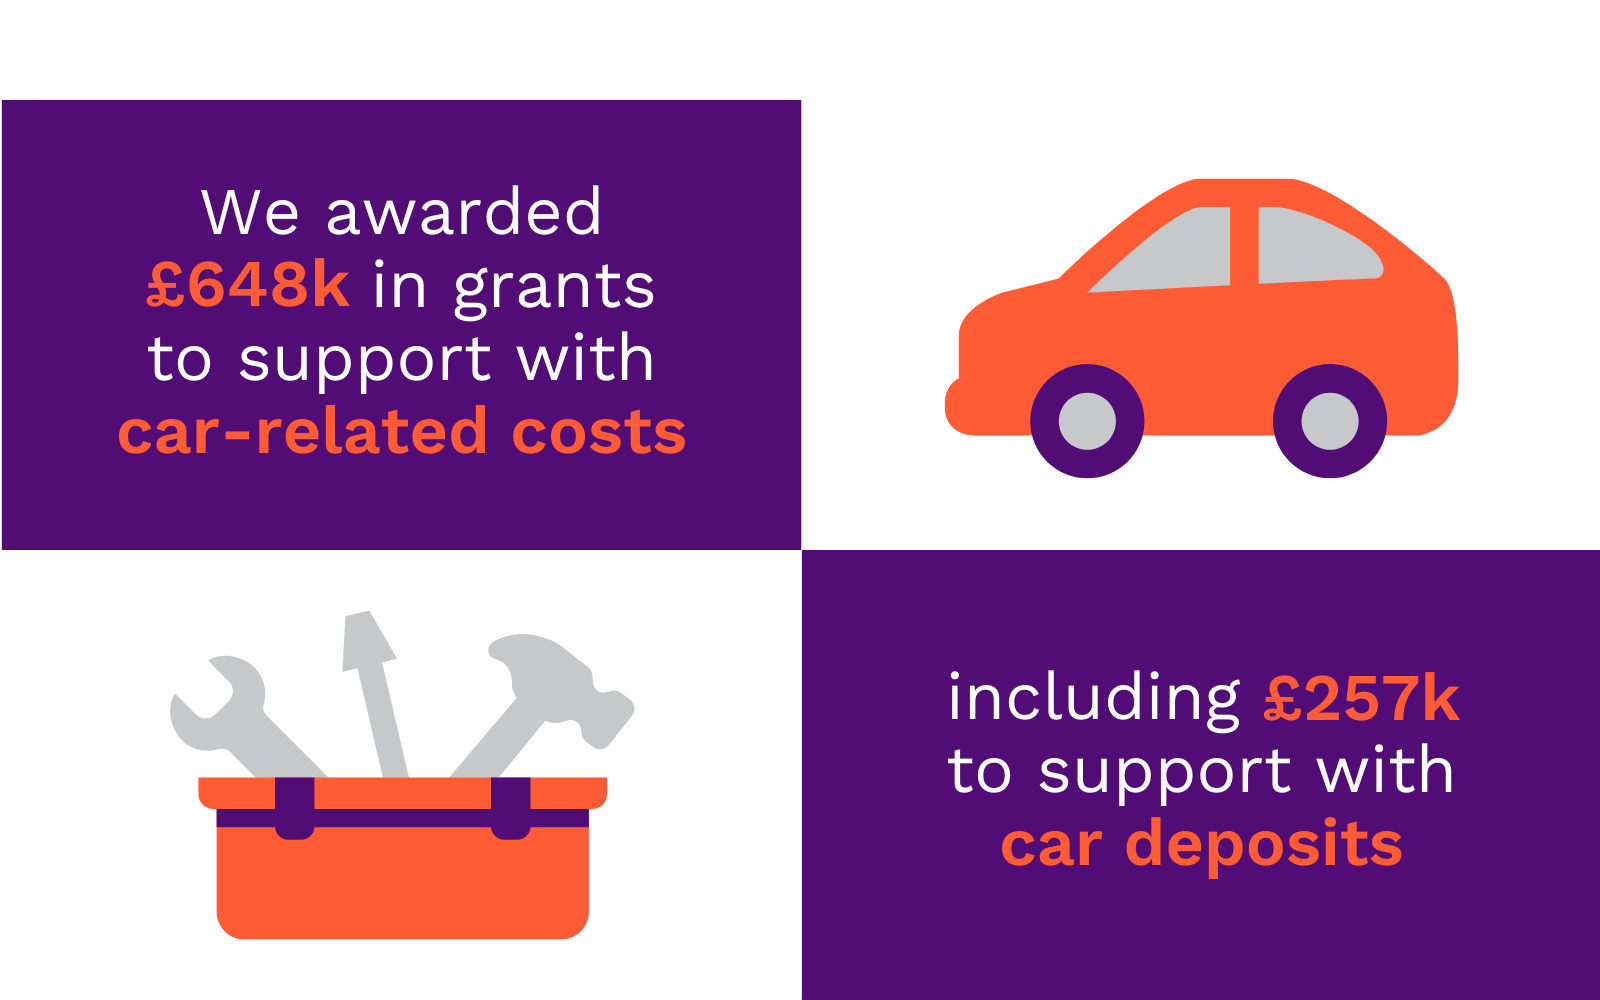 Text reads: We awarded £257k in grants to support with car deposits.